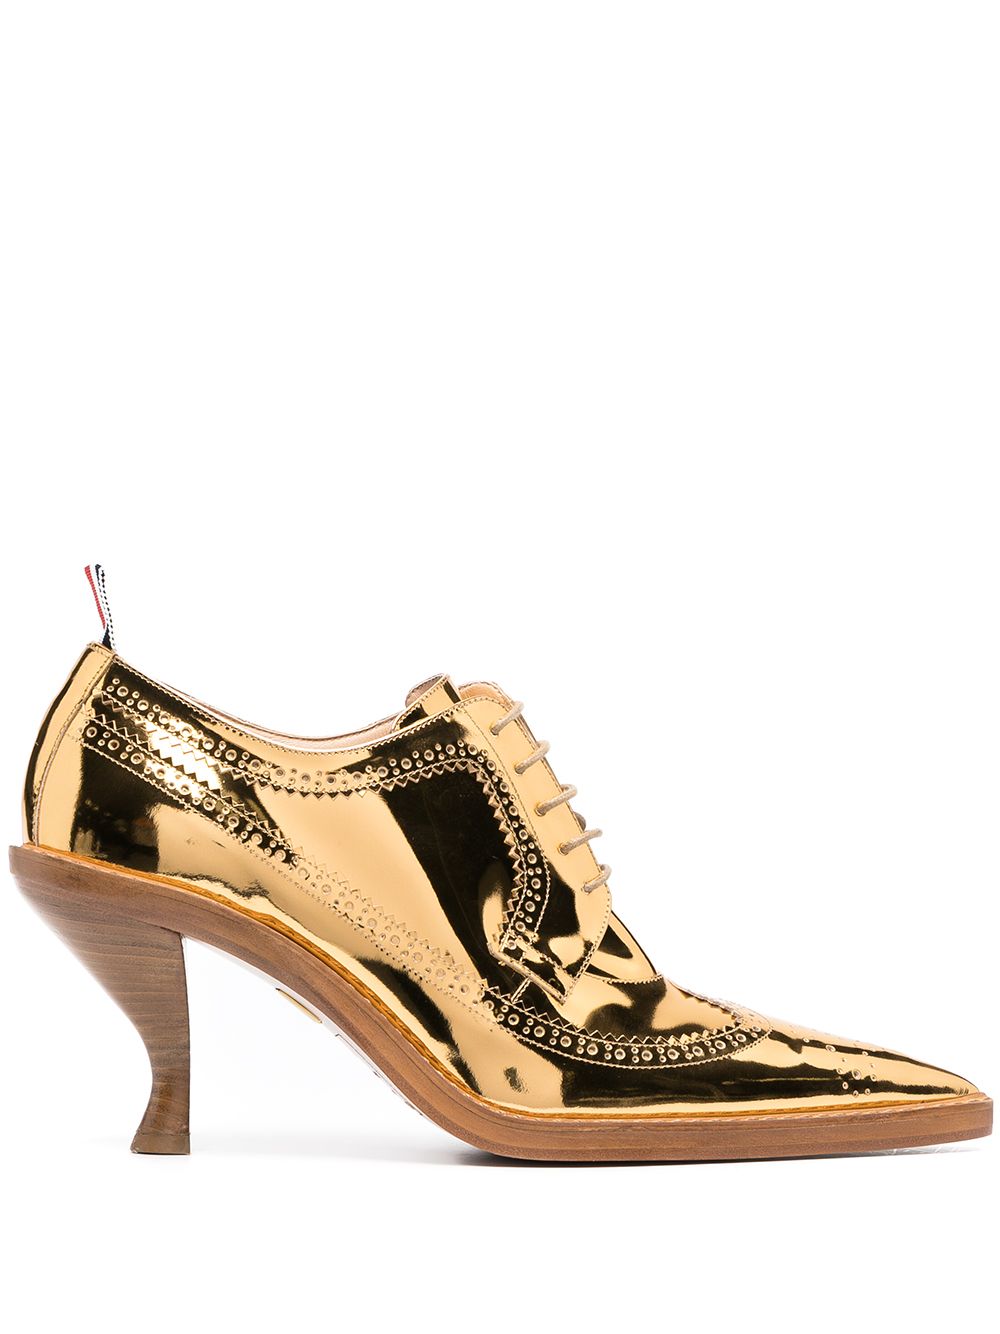 metallic longwing brogues with sculpted heel